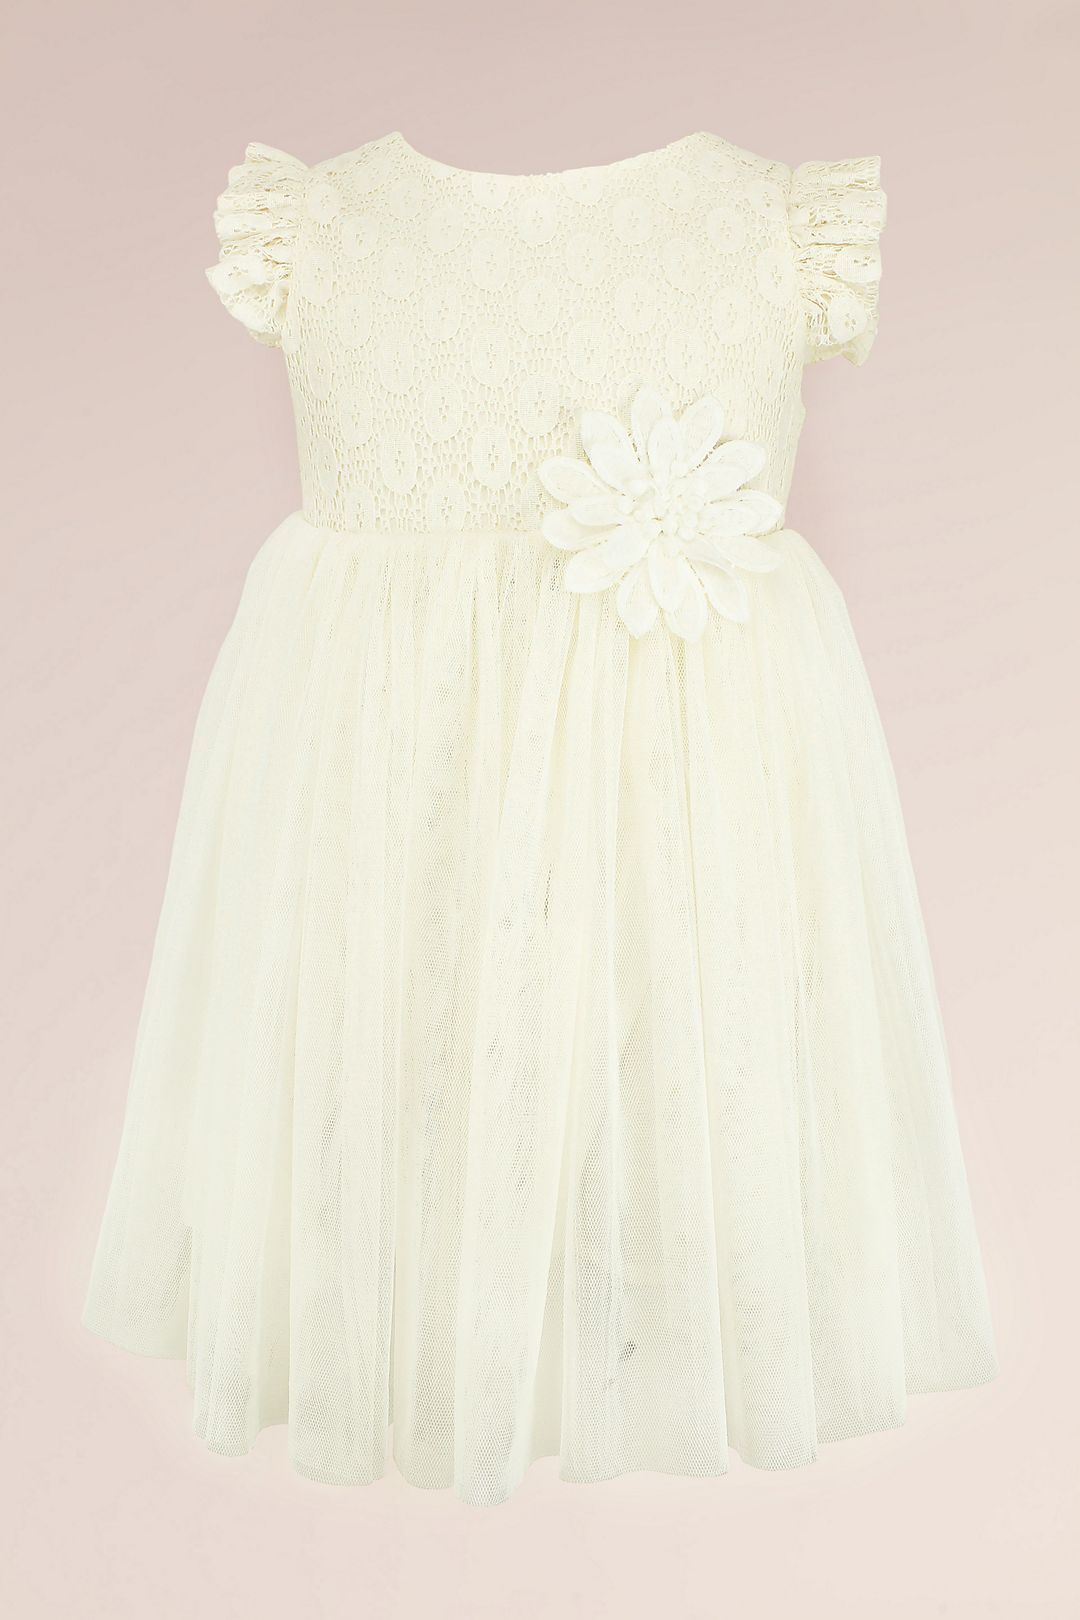 Lace Tulle Flower Girl Dress with Flutter Sleeves Image 2